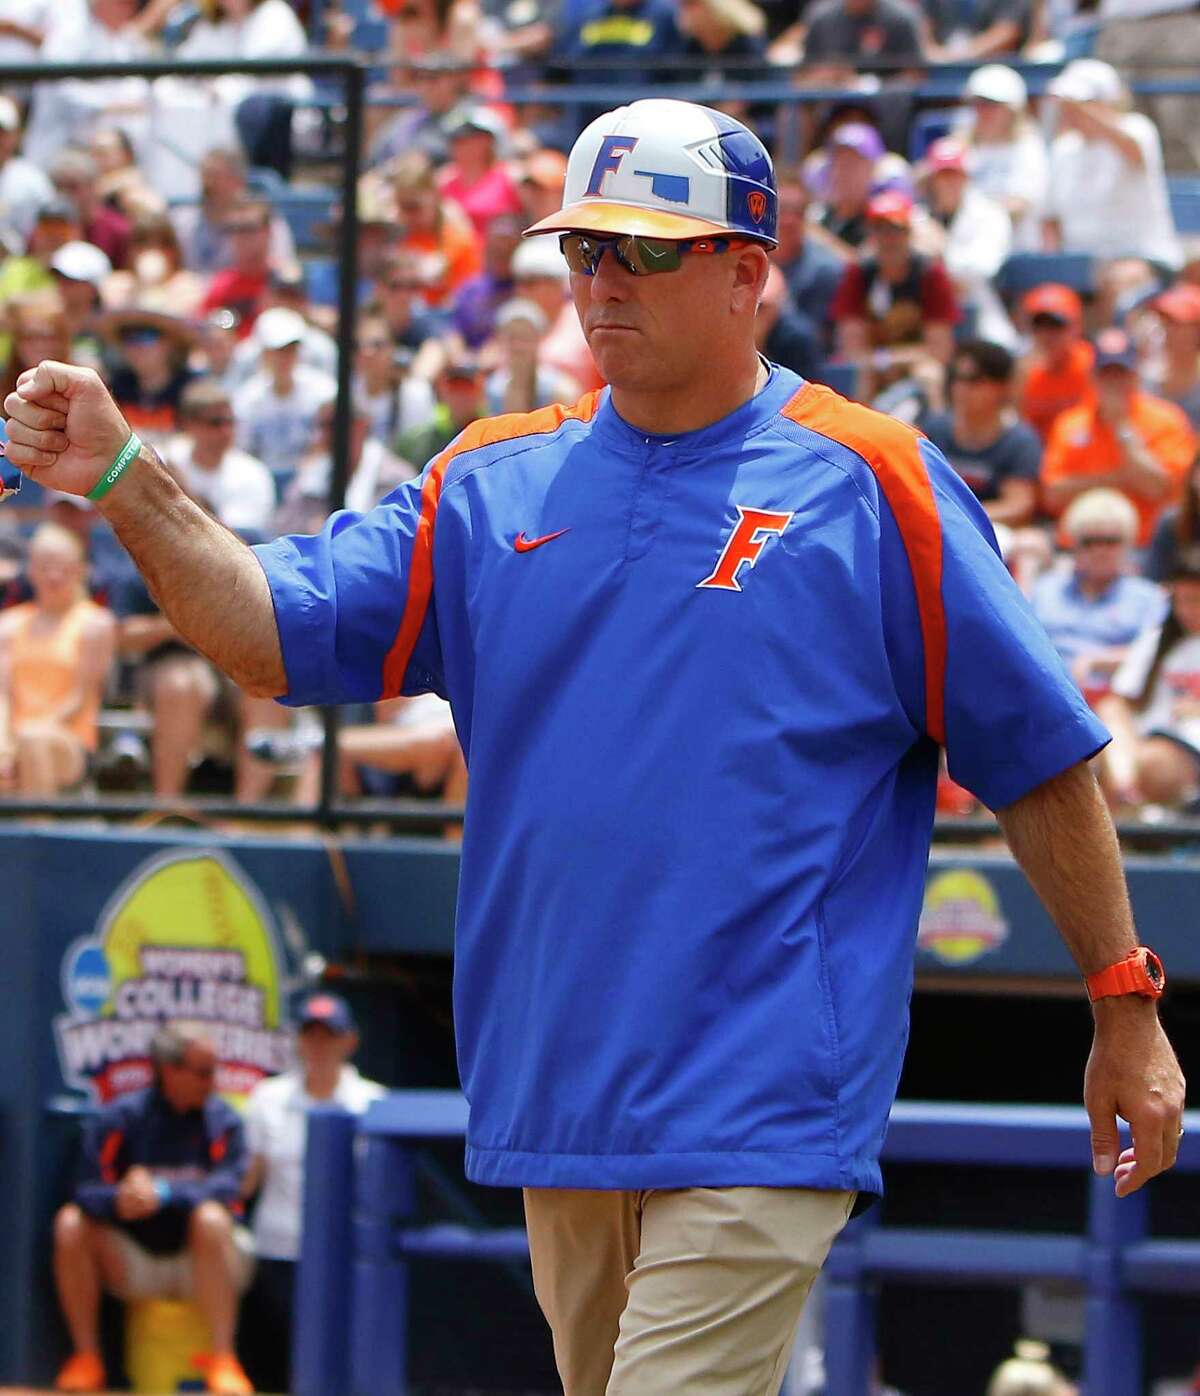 FILE - In this May 31, 2015, file photo, Florida's head coach Tim Walton gestures to one of his players in the fourth inning during an NCAA Women's College World Series game against Auburn in Oklahoma City. Florida softball coach Tim Walton was involved in an altercation with Auburn shortstop Haley Fagan on Monday night, March 27, 2017, after Walton gave Fagan a slight push during postgame handshakes. (AP Photo/Alonzo Adams, FIle)